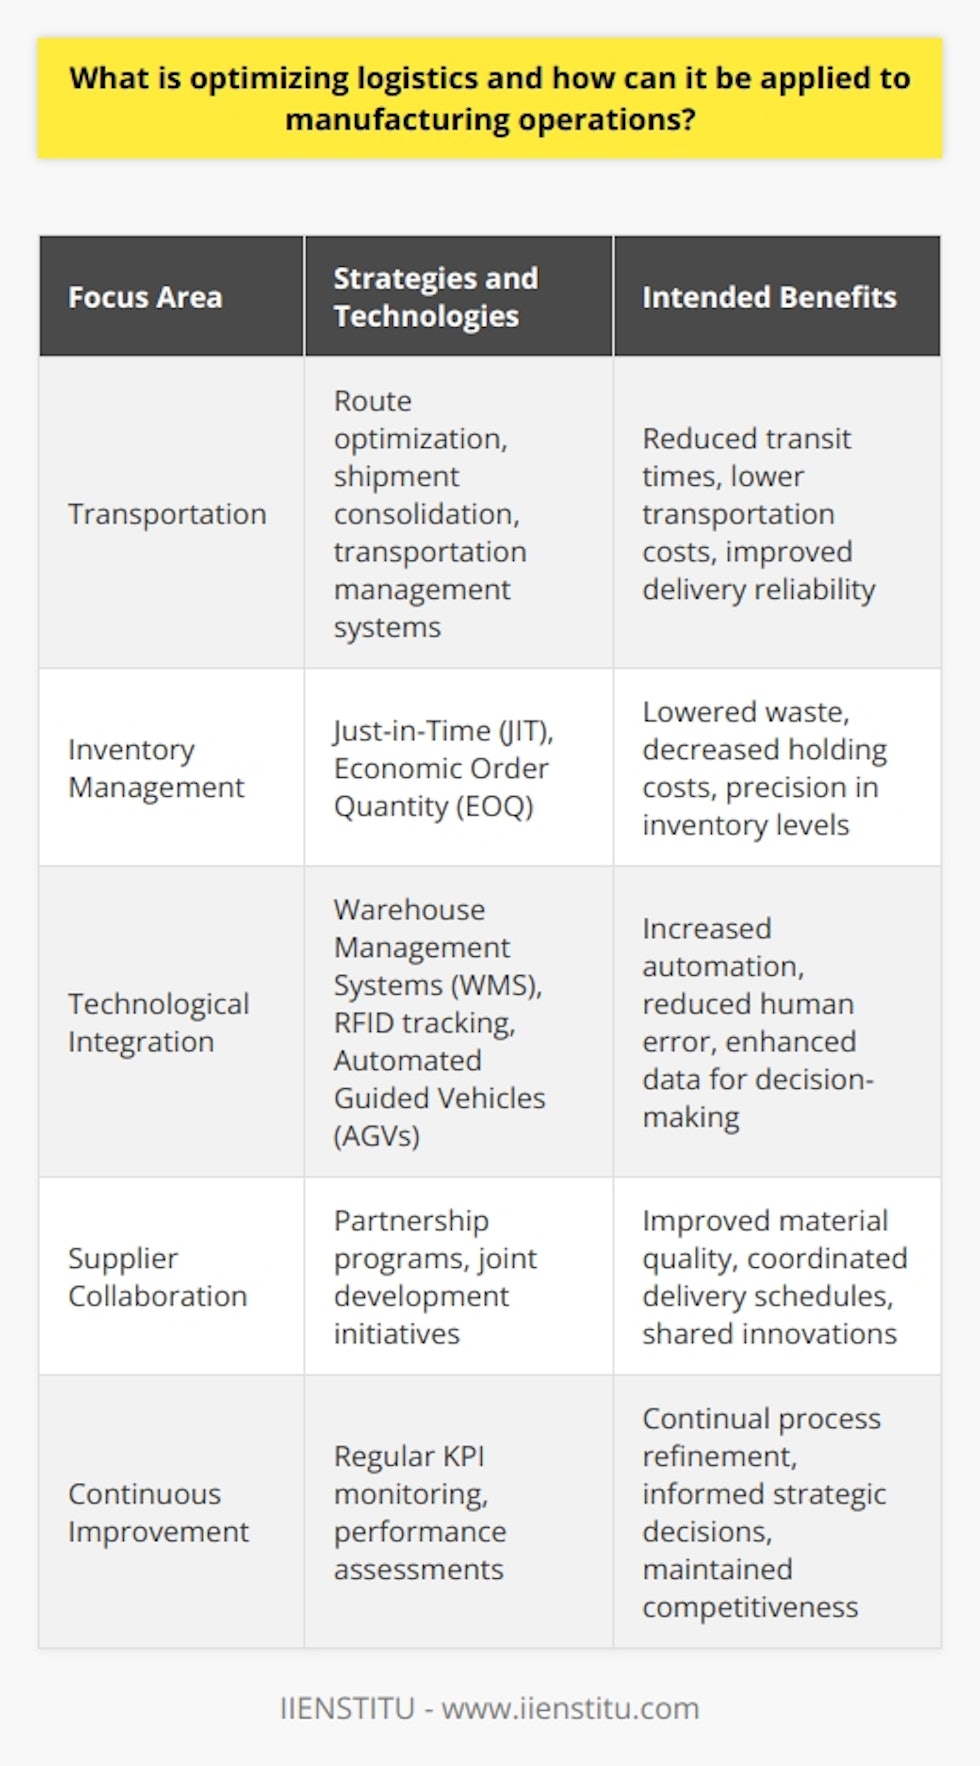 Optimizing logistics within manufacturing operations is a comprehensive approach to streamlining and improving various components of the supply chain process. It has the potential to drastically enhance the efficiency and effectiveness of manufacturing by systematically targeting areas such as transportation, inventory, technological integration, supplier collaboration, and continuous improvement methodologies.Streamlined transportation is often a major focus area, as it directly impacts the speed and cost with which materials and products are moved. By analyzing and optimizing routes, consolidating shipments, and adopting transportation management systems, businesses can minimize delays, reduce transportation costs, and improve on-time delivery rates.Inventory management is another pillar of logistics optimization. By leveraging strategies such as JIT and EOQ, manufacturing operations can manage their inventory levels with greater precision, ensuring that the right amount of raw materials or components are available exactly when needed, which eliminates waste and reduces holding costs.The inclusion of advanced technologies in logistics optimization is becoming increasingly prevalent. The integration of systems like WMS, RFID tracking, and AGVs can automate numerous tasks that were previously manual, minimizing the risk of human error and enhancing overall productivity. This not only improves warehouse operations but also offers more accurate and timely data for decision-making.Supplier collaboration embodies the partnership approach, where manufacturers and suppliers work together towards common goals. This can harvest a host of benefits such as enhancing the quality of materials, streamlining delivery schedules, and sharing innovations that can lead to enhanced logistics processes.Finally, the philosophy of continuous improvement, embodied by the regular monitoring and assessment of KPIs, ensures that a logistics optimization strategy remains dynamic and adaptable. Measurements such as turnaround times, order accuracy, and customer satisfaction can guide improvements and inform strategic decisions.Indeed, applying these principles of logistics optimization helps manufacturers reduce operational costs, accelerate production cycles, align supply chain activities with the demands of the market, and provides a competitive edge in an ever-evolving industry landscape.